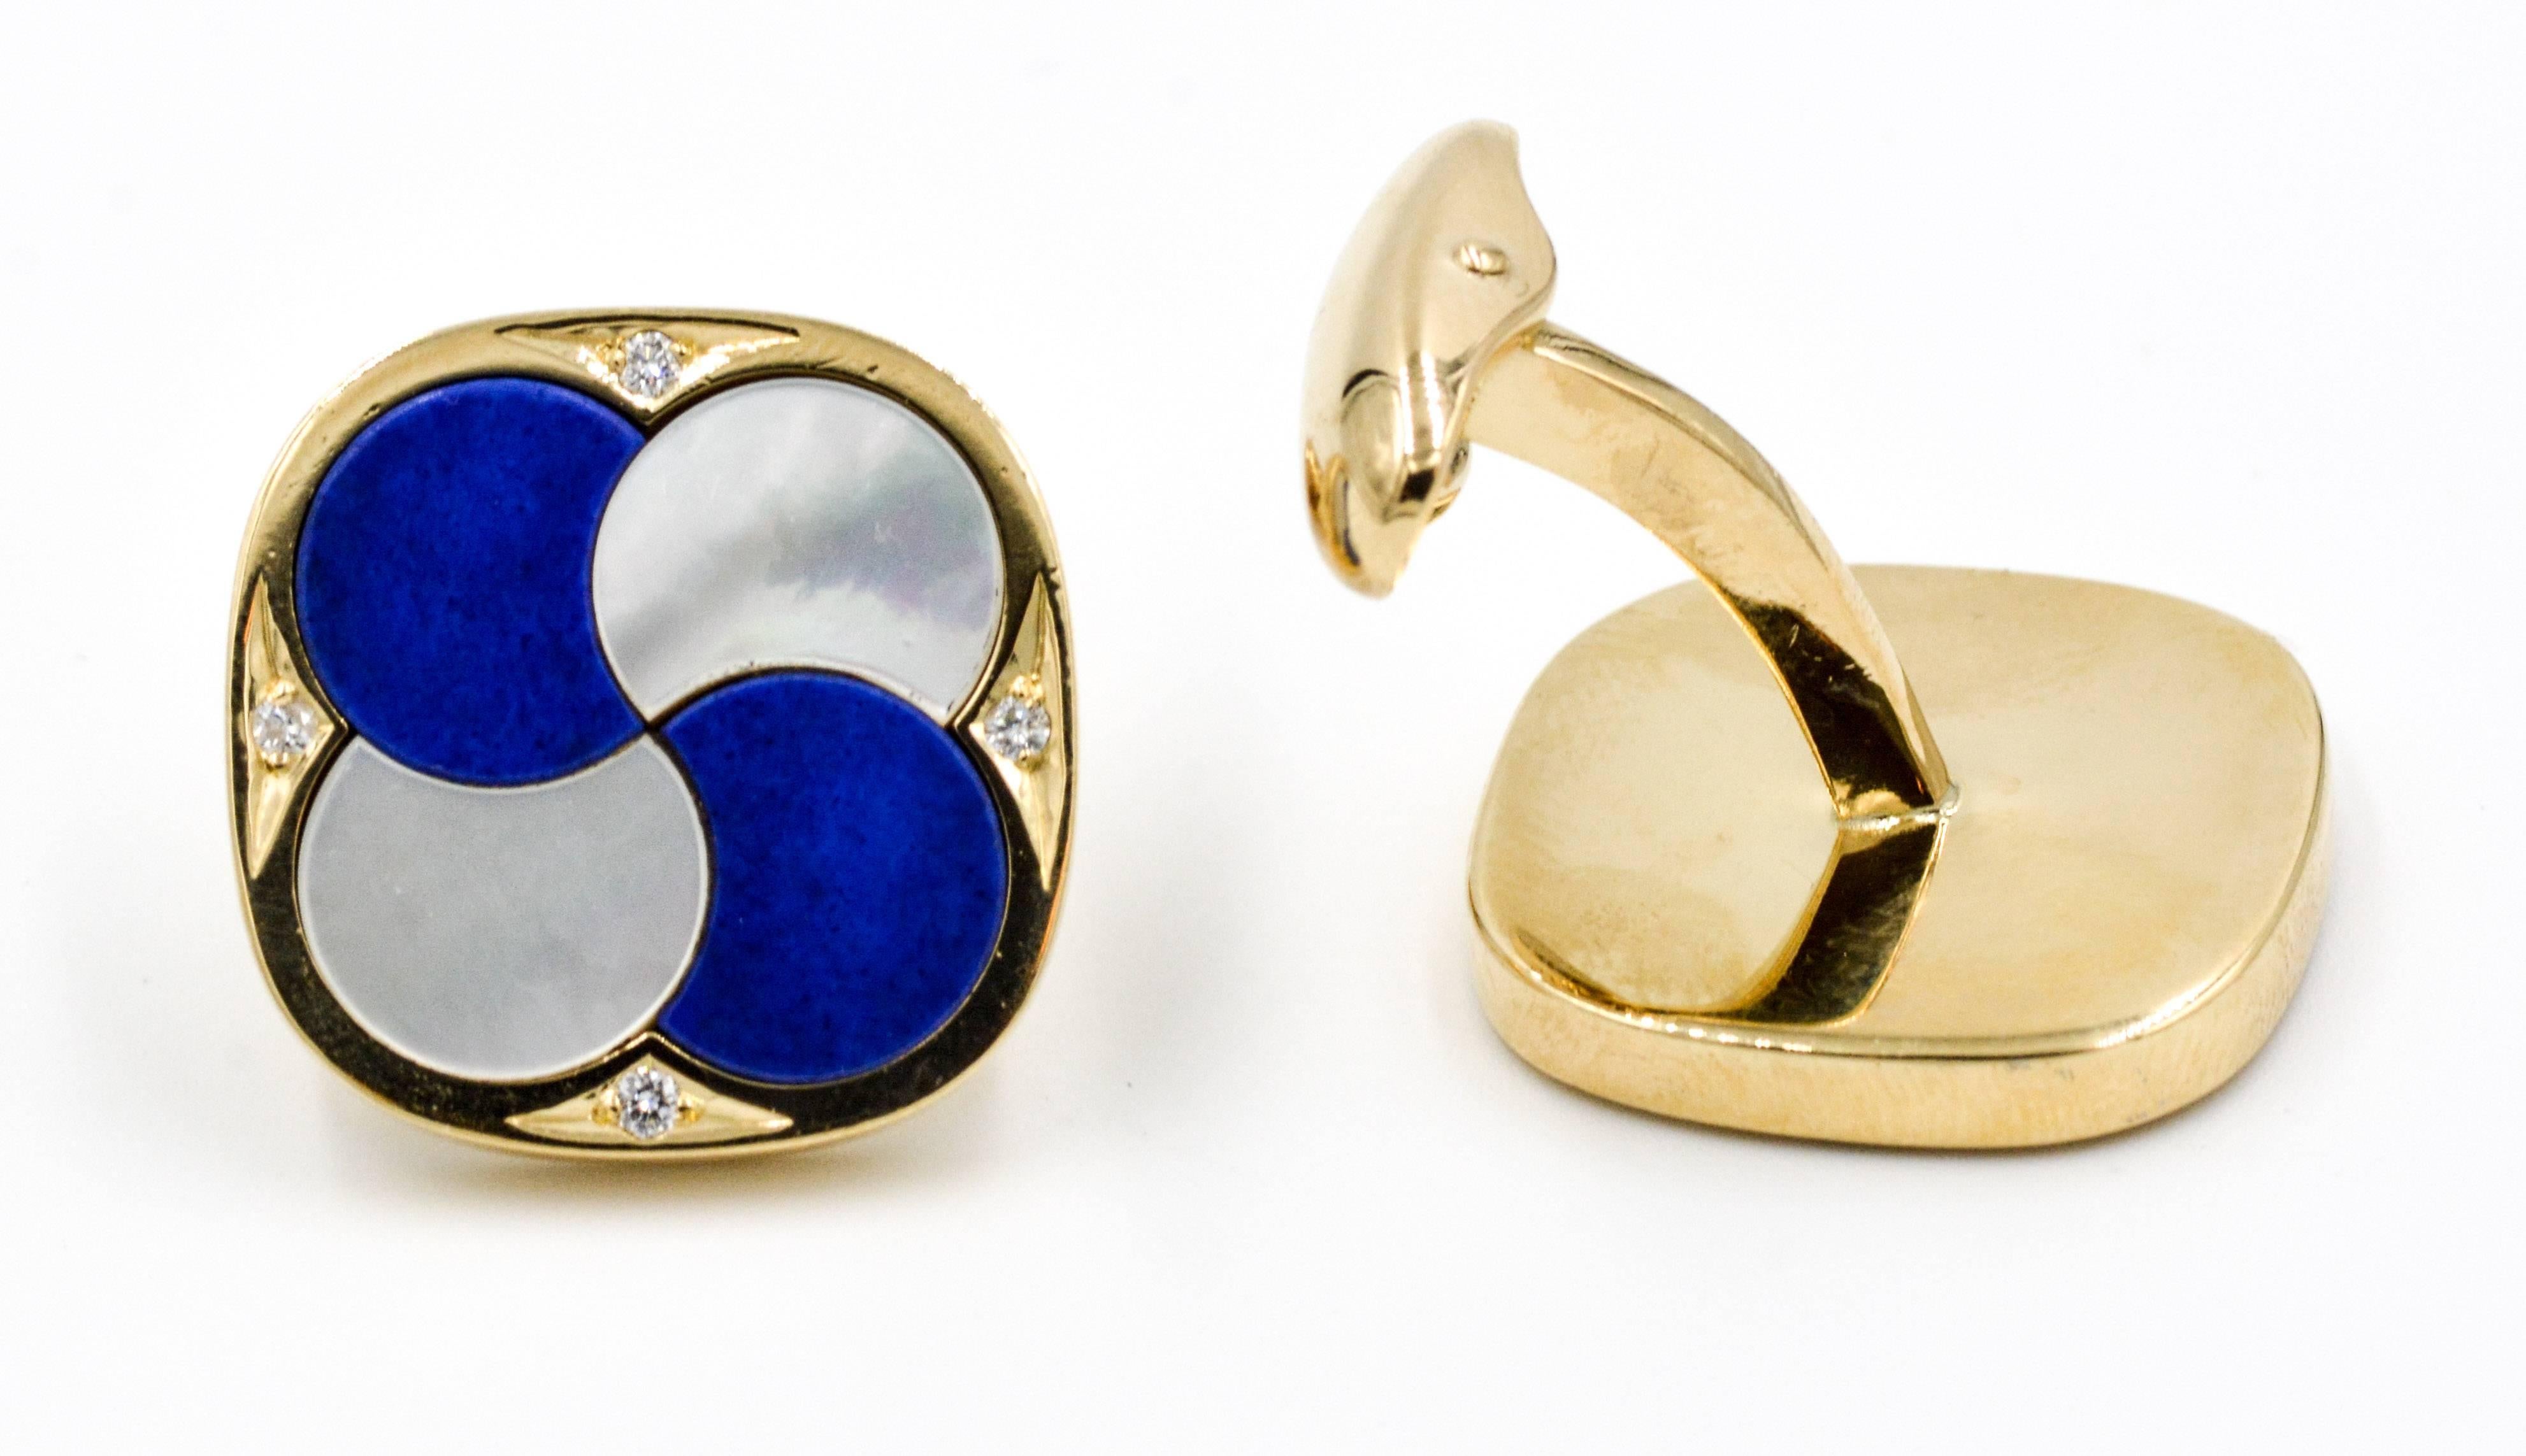 These amazing 18kt yellow gold cuff links are set with beautifully contrasting white mother of pearl and rich blue lapis lazuli circles that overlap as the spiral around the center of these cushion shaped cuff links.  Accenting these cuff links are